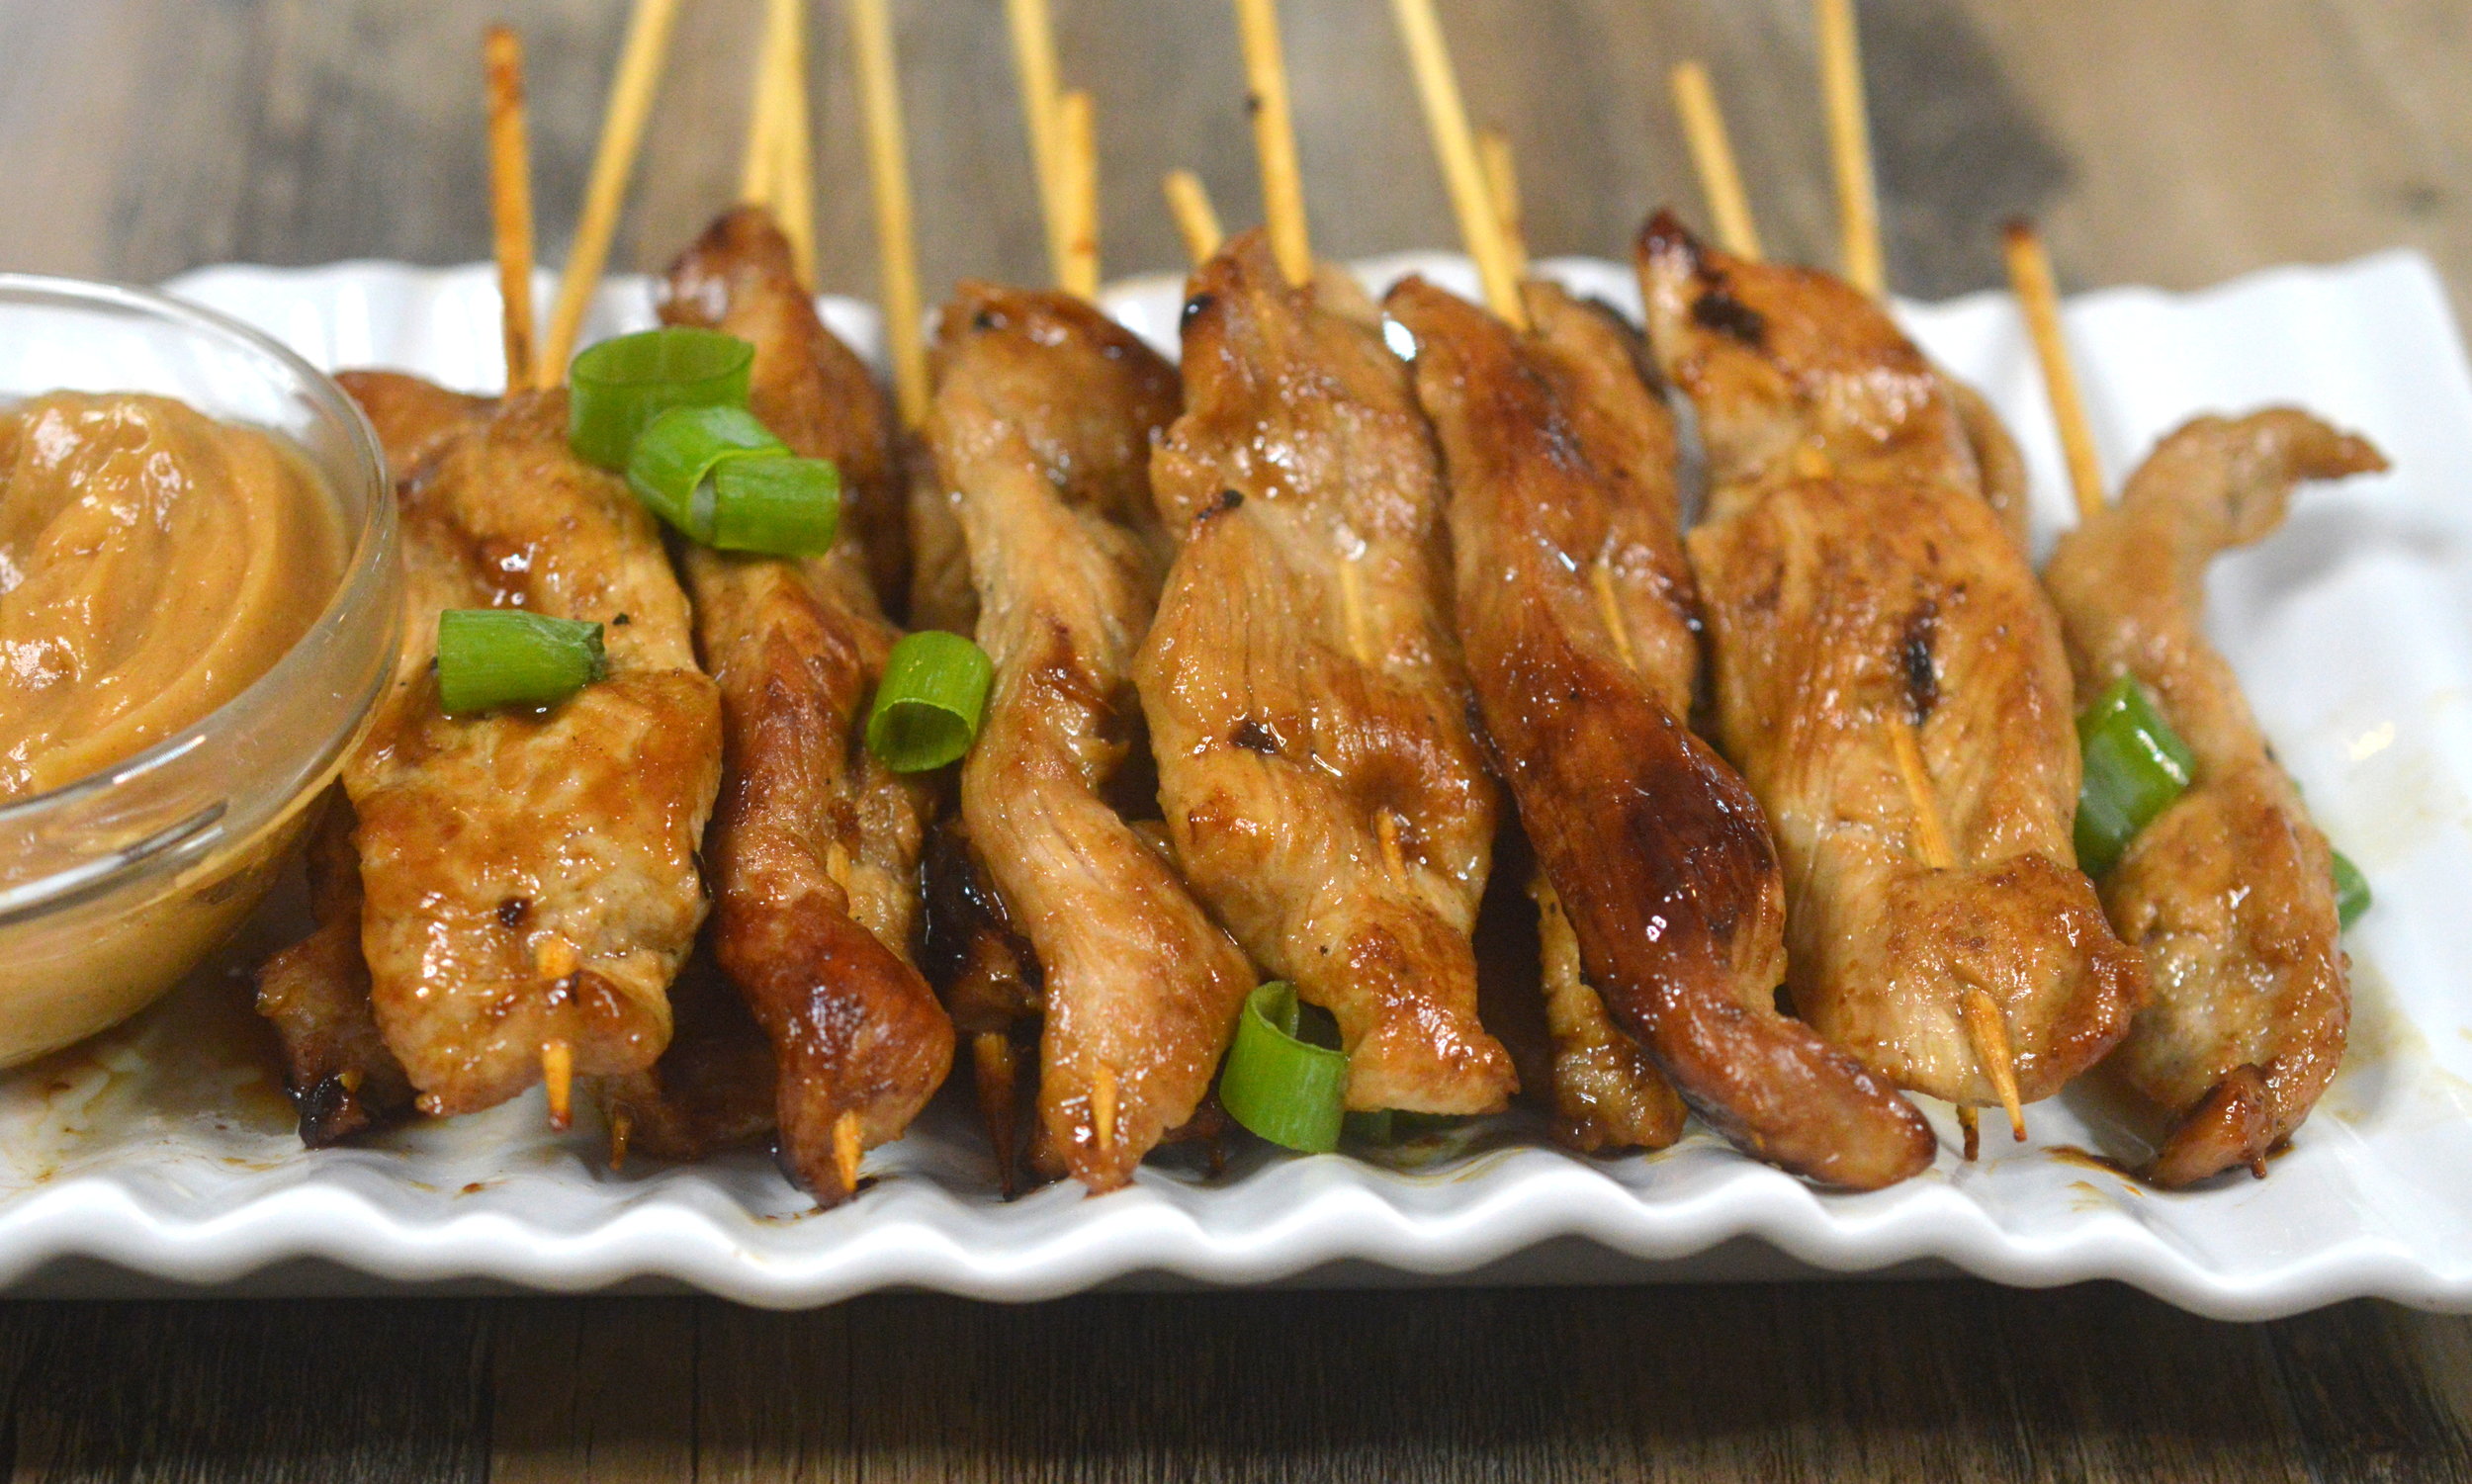 Veal skewers with a peanut dipping sauce